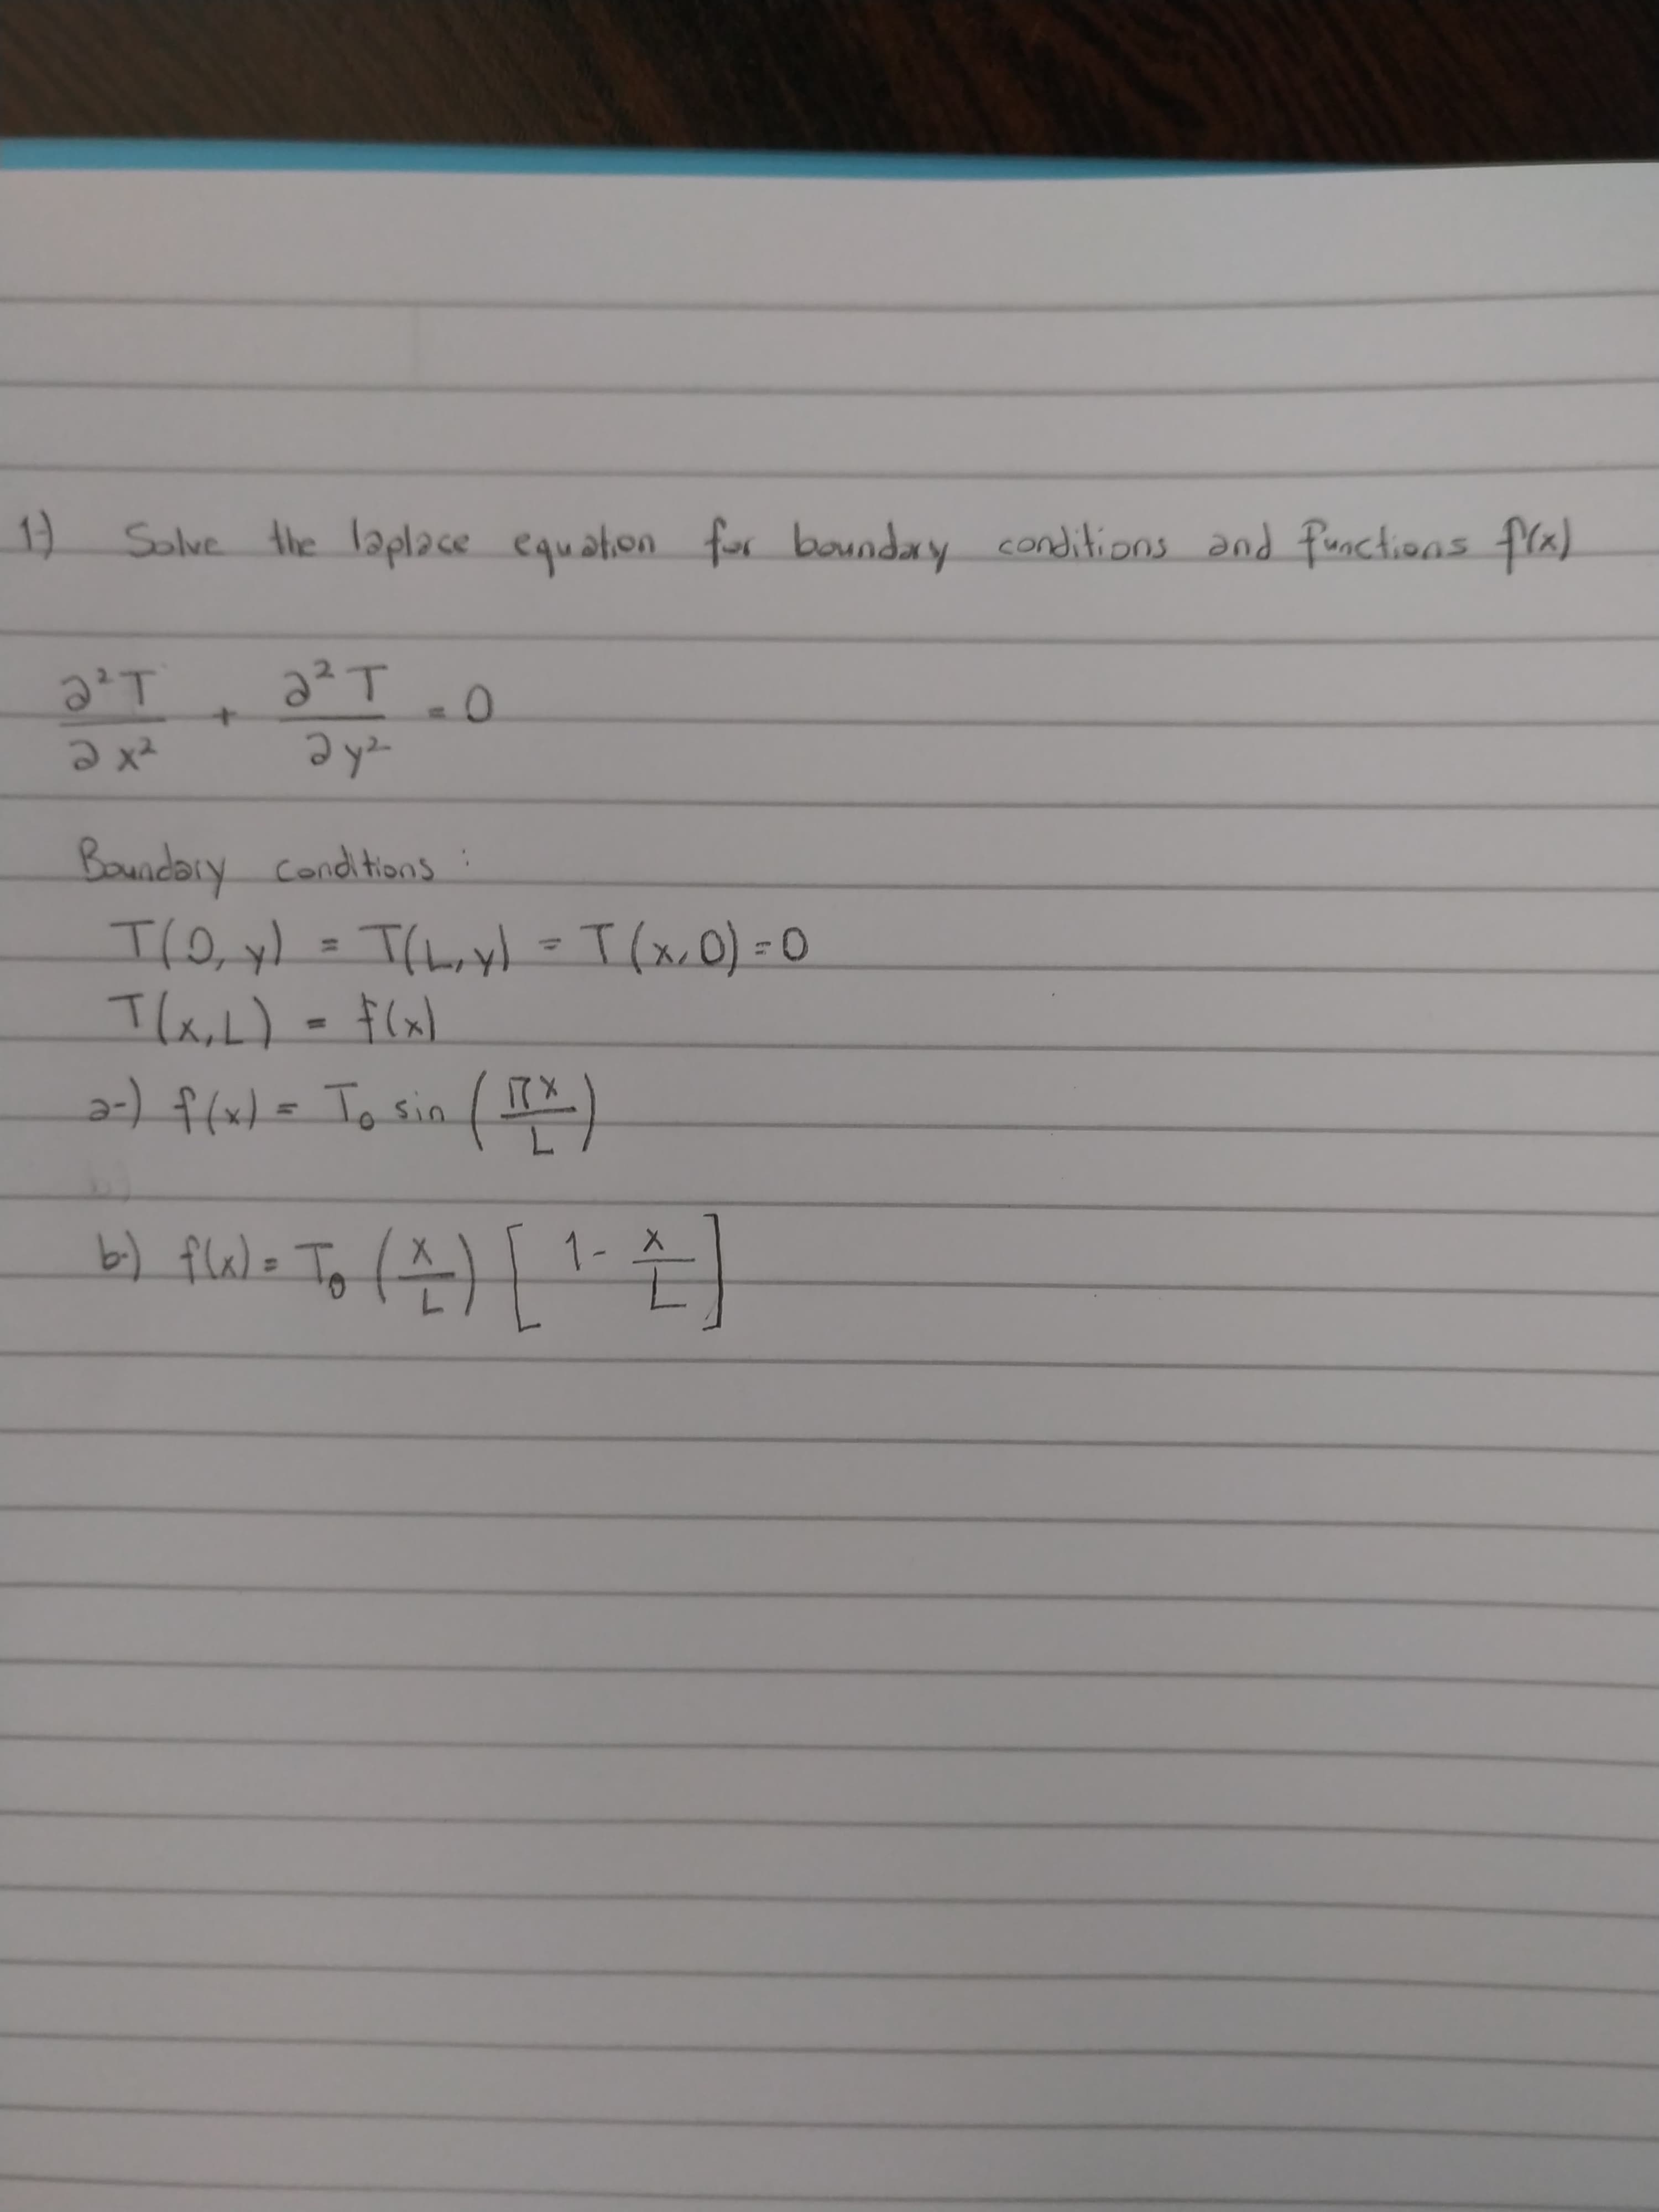 1)
Solve the laplace equaion for bounday condilions and functions fra)
2²T.0
+
x²
Bawidary Condtions ?
I(0, y) = T(hr yl =T(x,0)=0
T(x,L) -f(x)
a (I)
%3D
2-)f(x)=To sin
b) fla)= To (4)
1-
